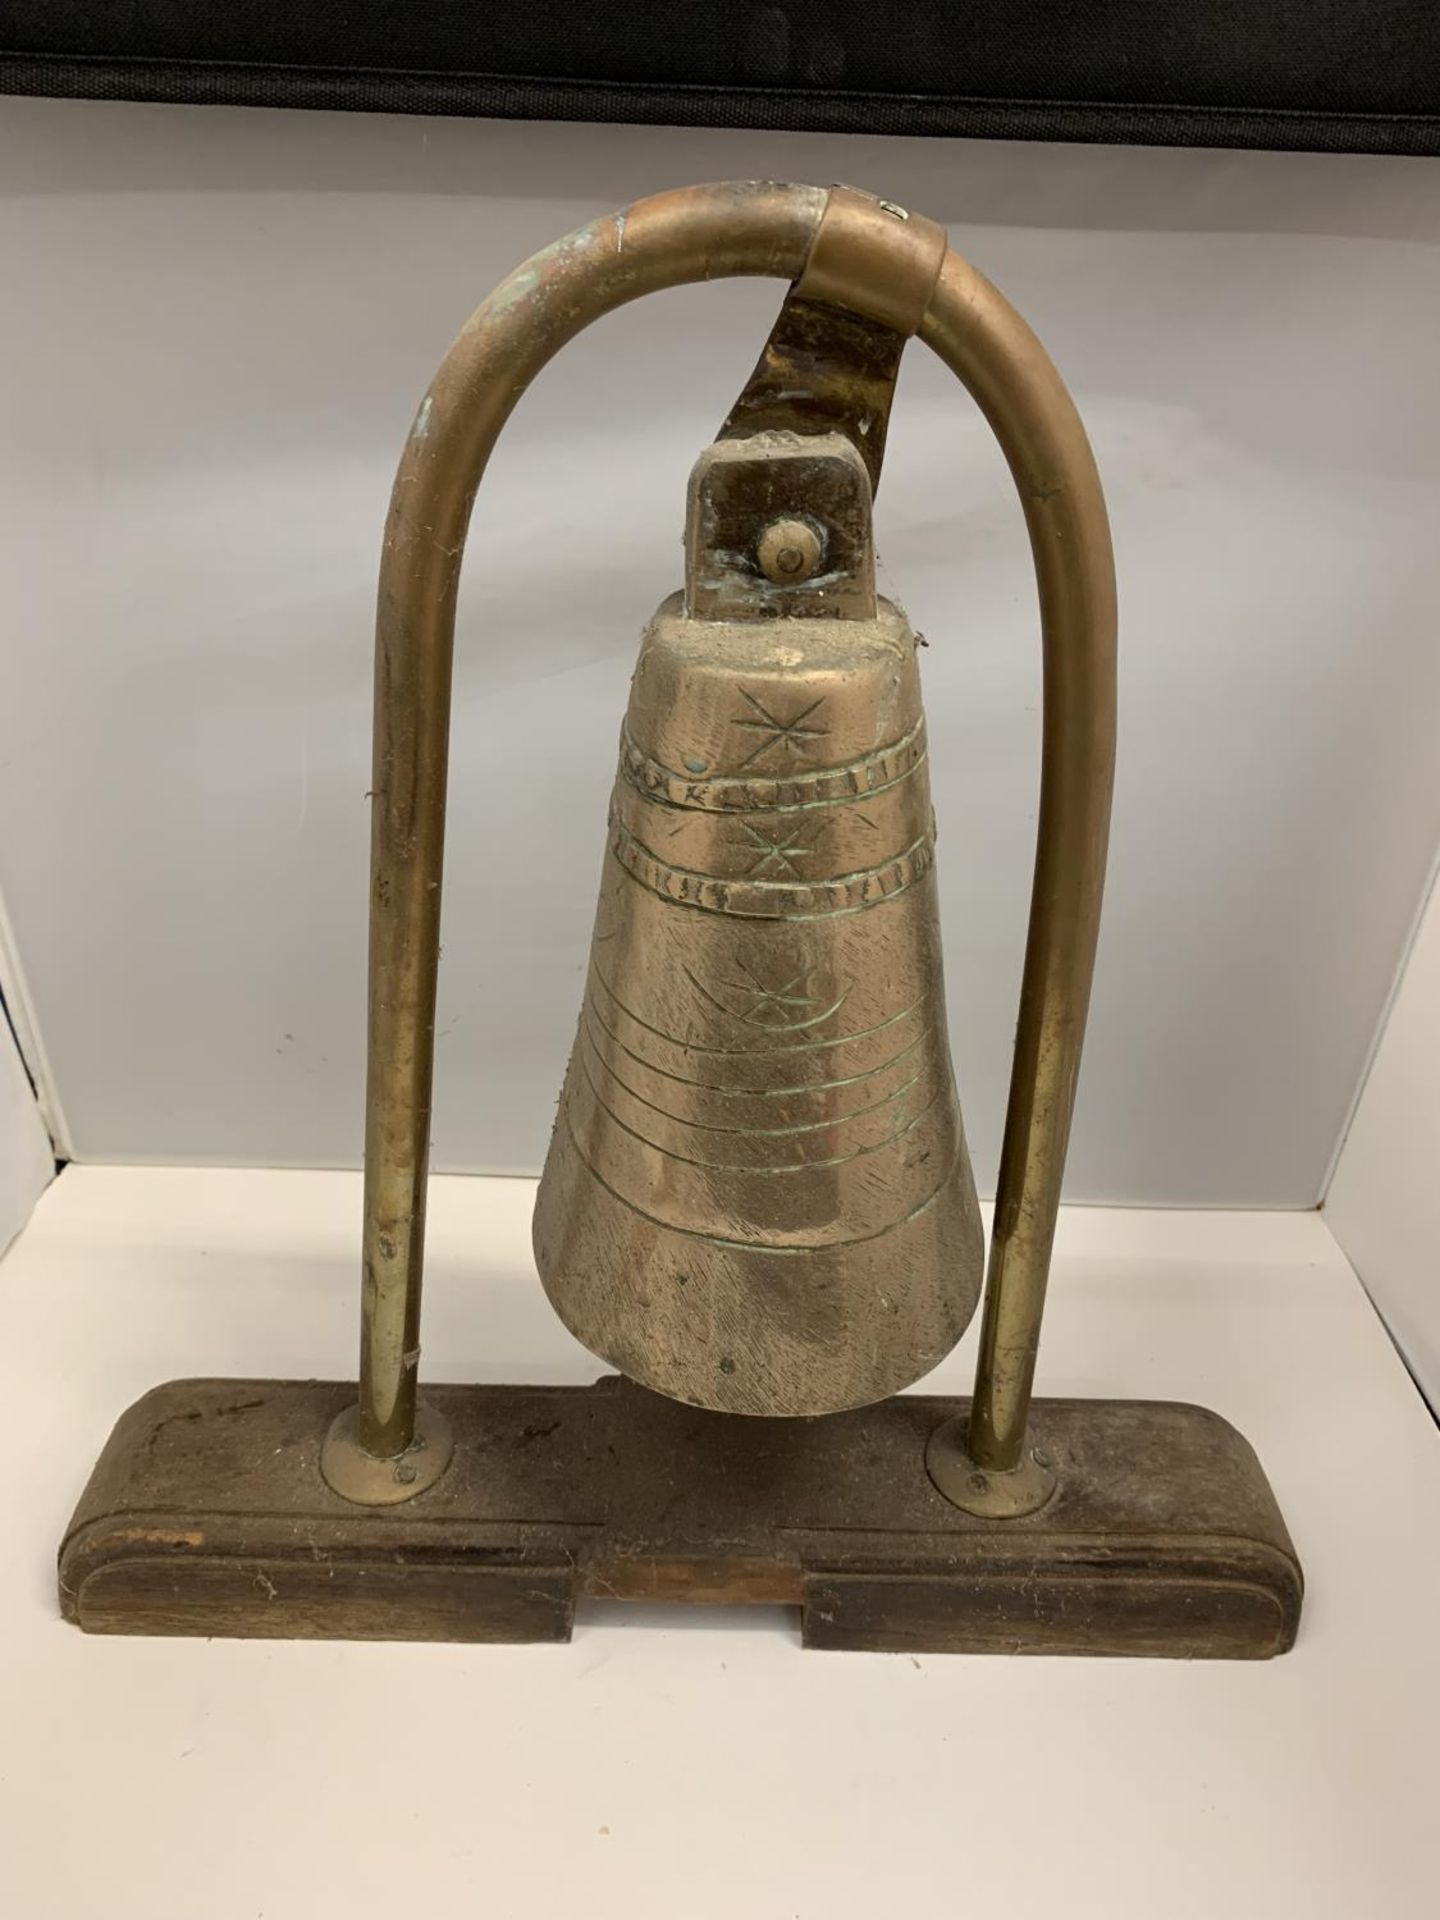 A VINTAGE UNUSUAL BRASS BELL ON A WOODEN PLINTH POSSIBLY FROM A SHIP H:45CM